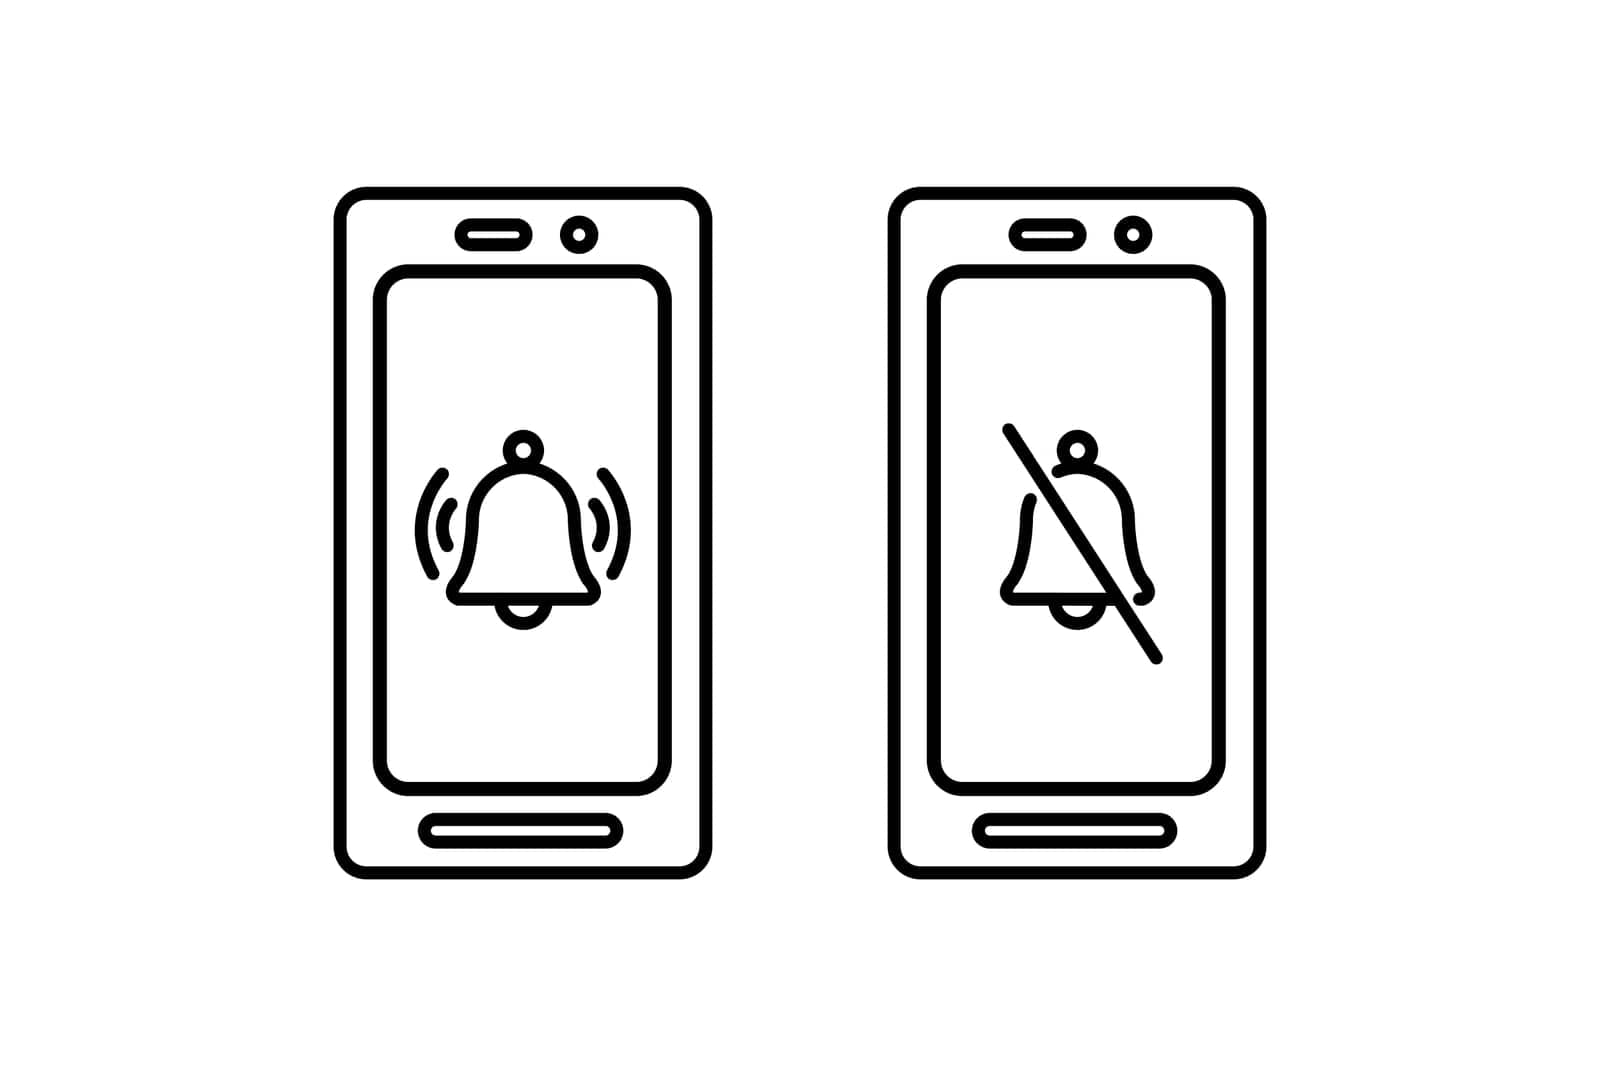 Mute sign. Silent mode or vibrate mode. Notification bell ring icon. Vector Illustration